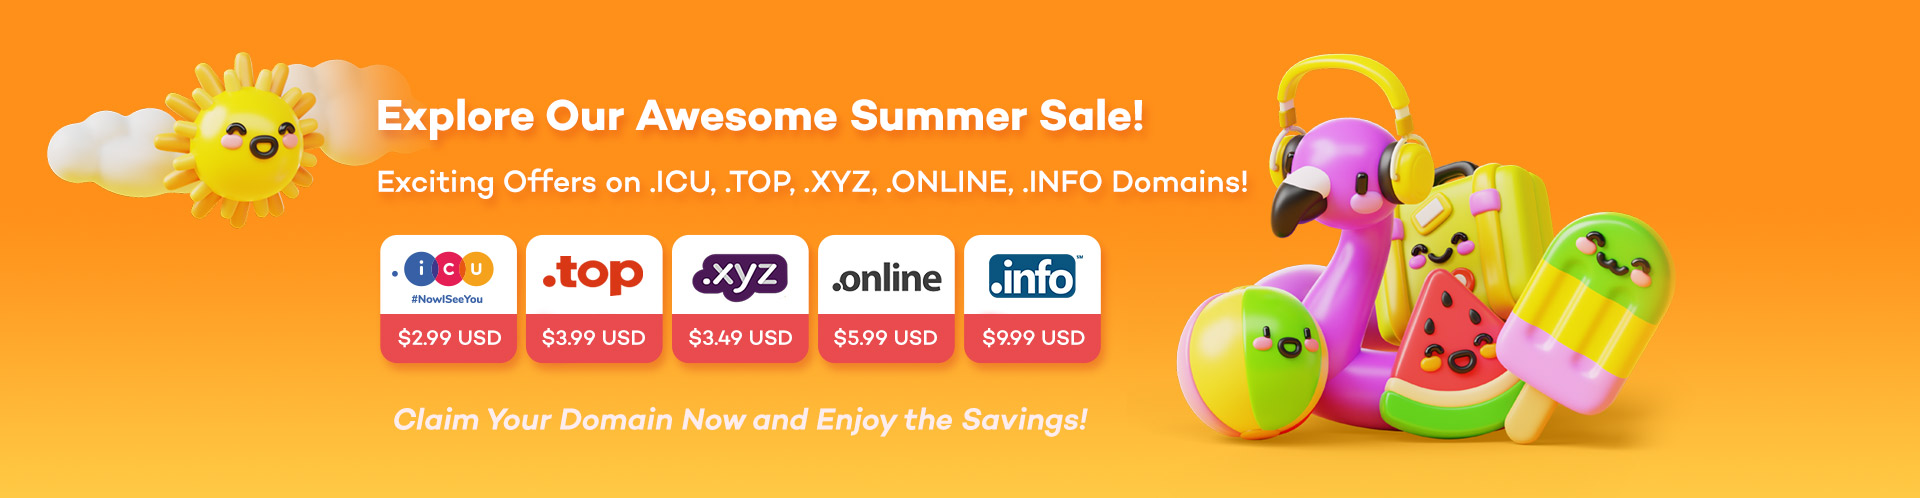 Cheap Domain Name | Big Holiday Sale | Domain Promos and Deals